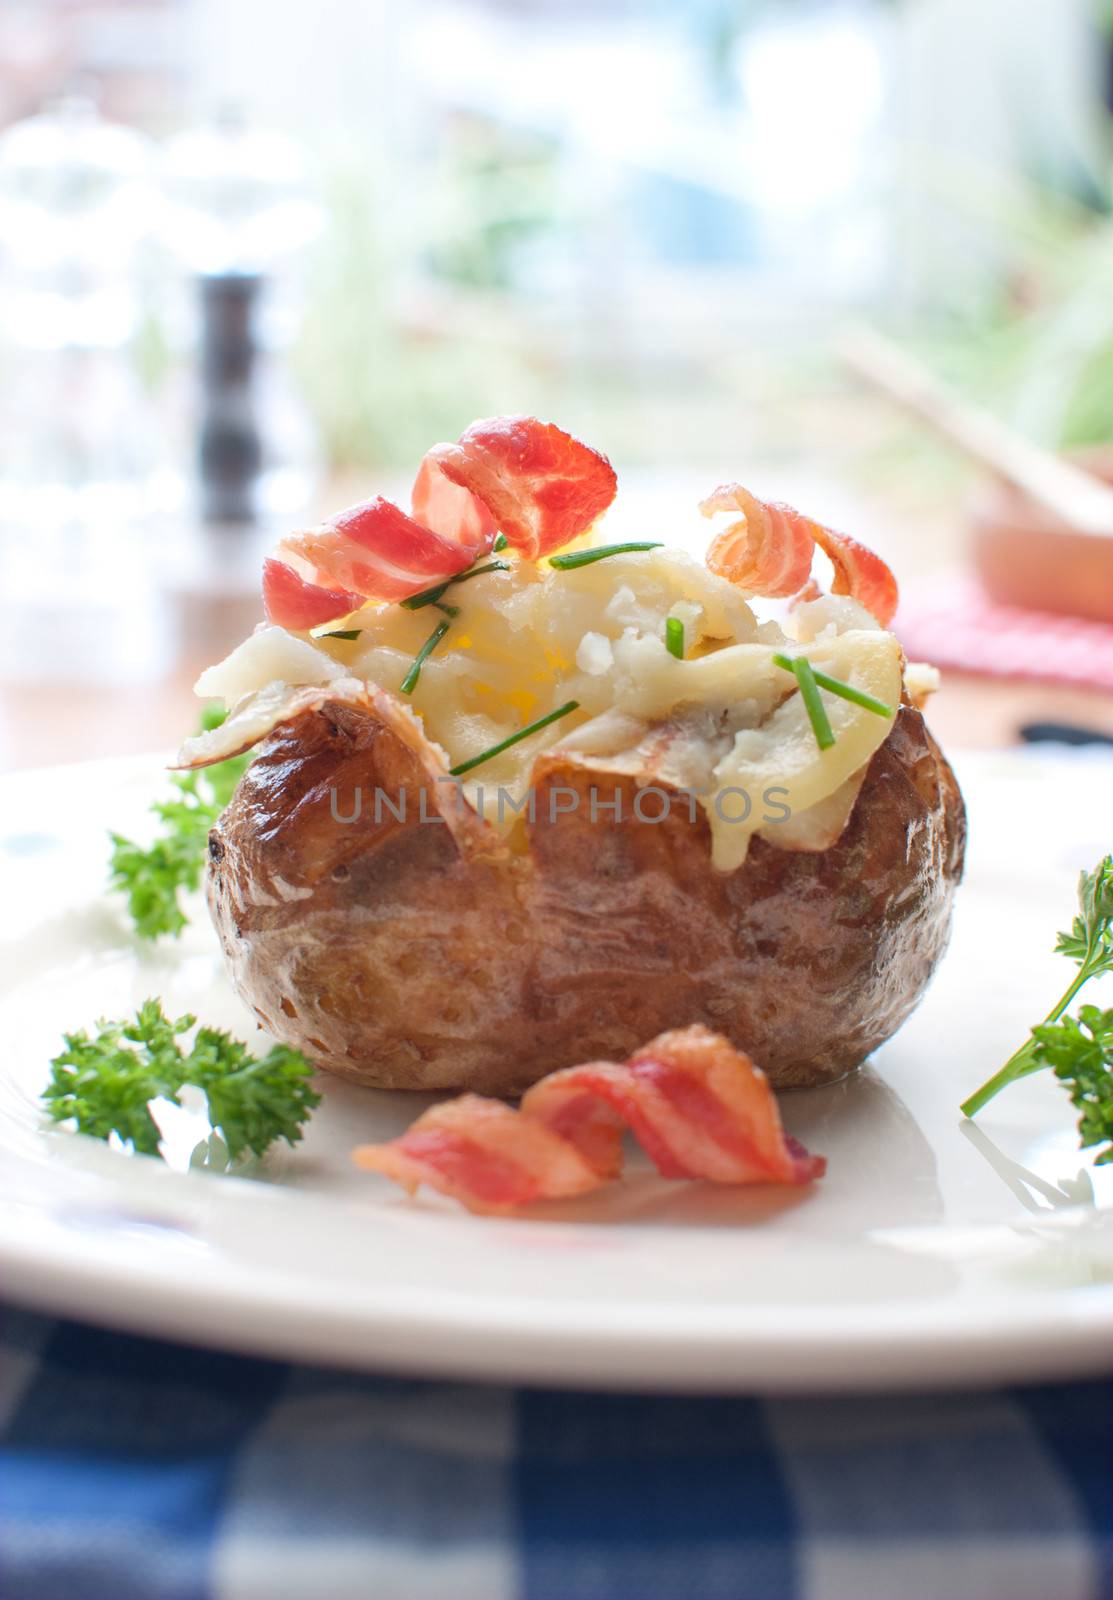 Baked potato with bacon and cheese